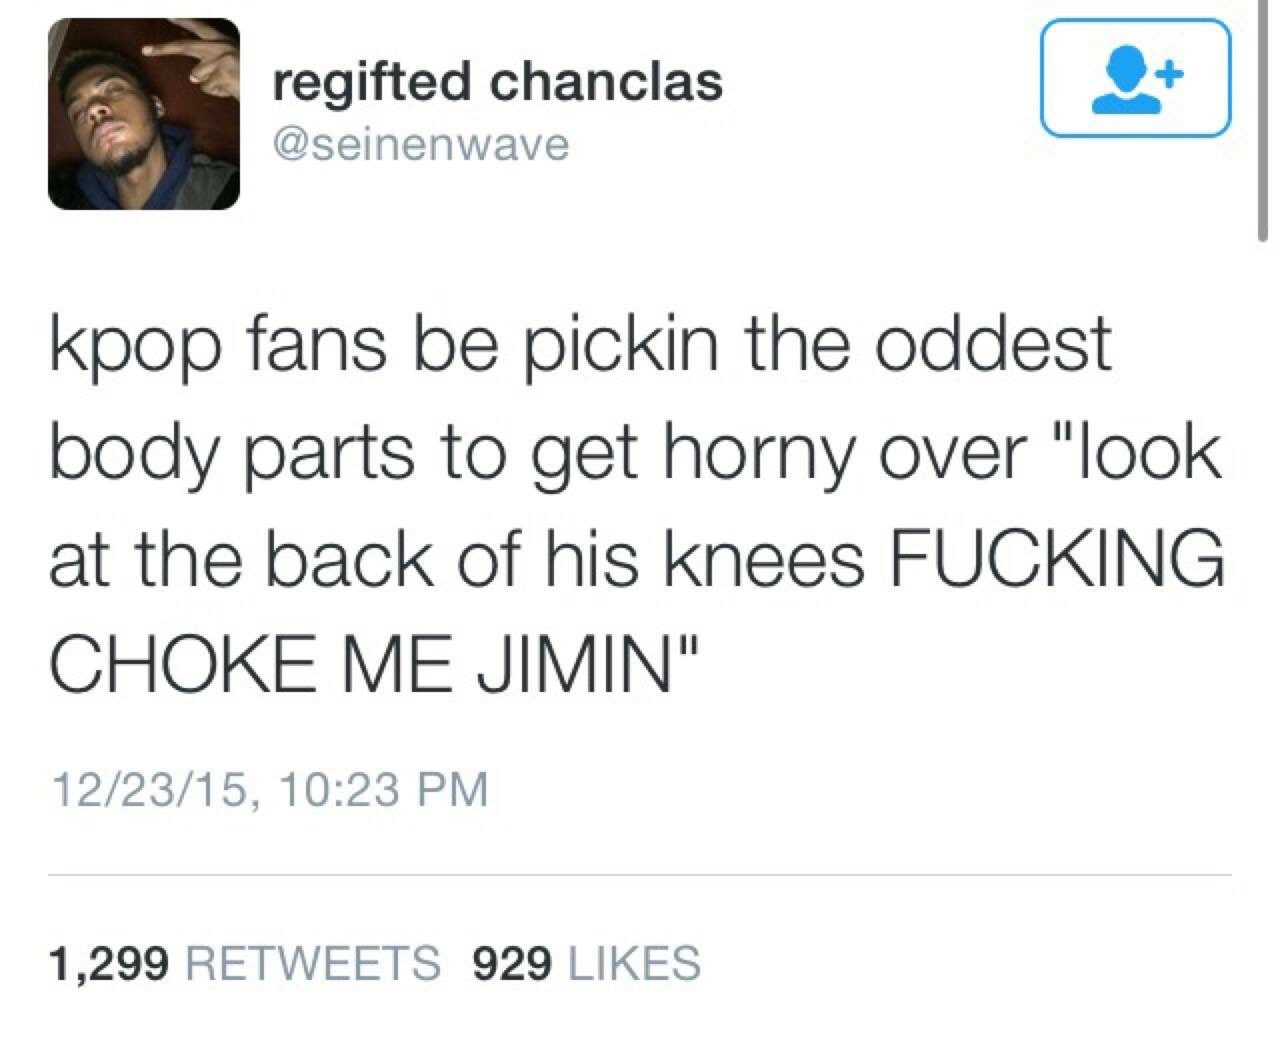 twitter short story - regifted chanclas kpop fans be pickin the oddest body parts to get horny over "look at the back of his knees Fucking Choke Me Jimin" 122315, 1,299 929